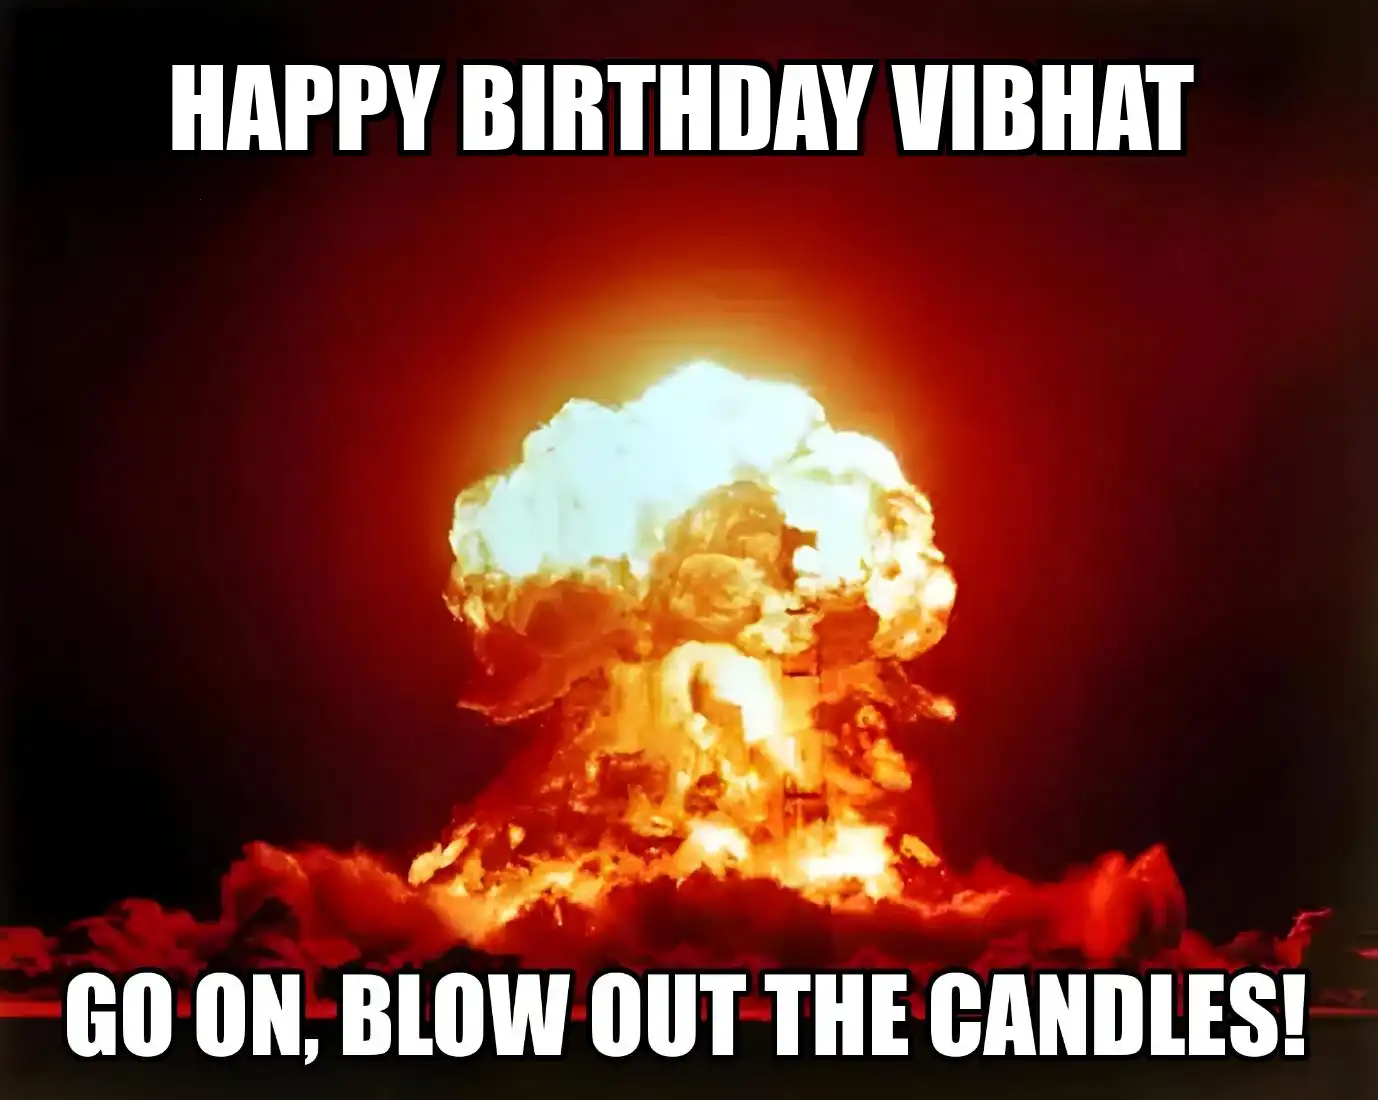 Happy Birthday Vibhat Go On Blow Out The Candles Meme